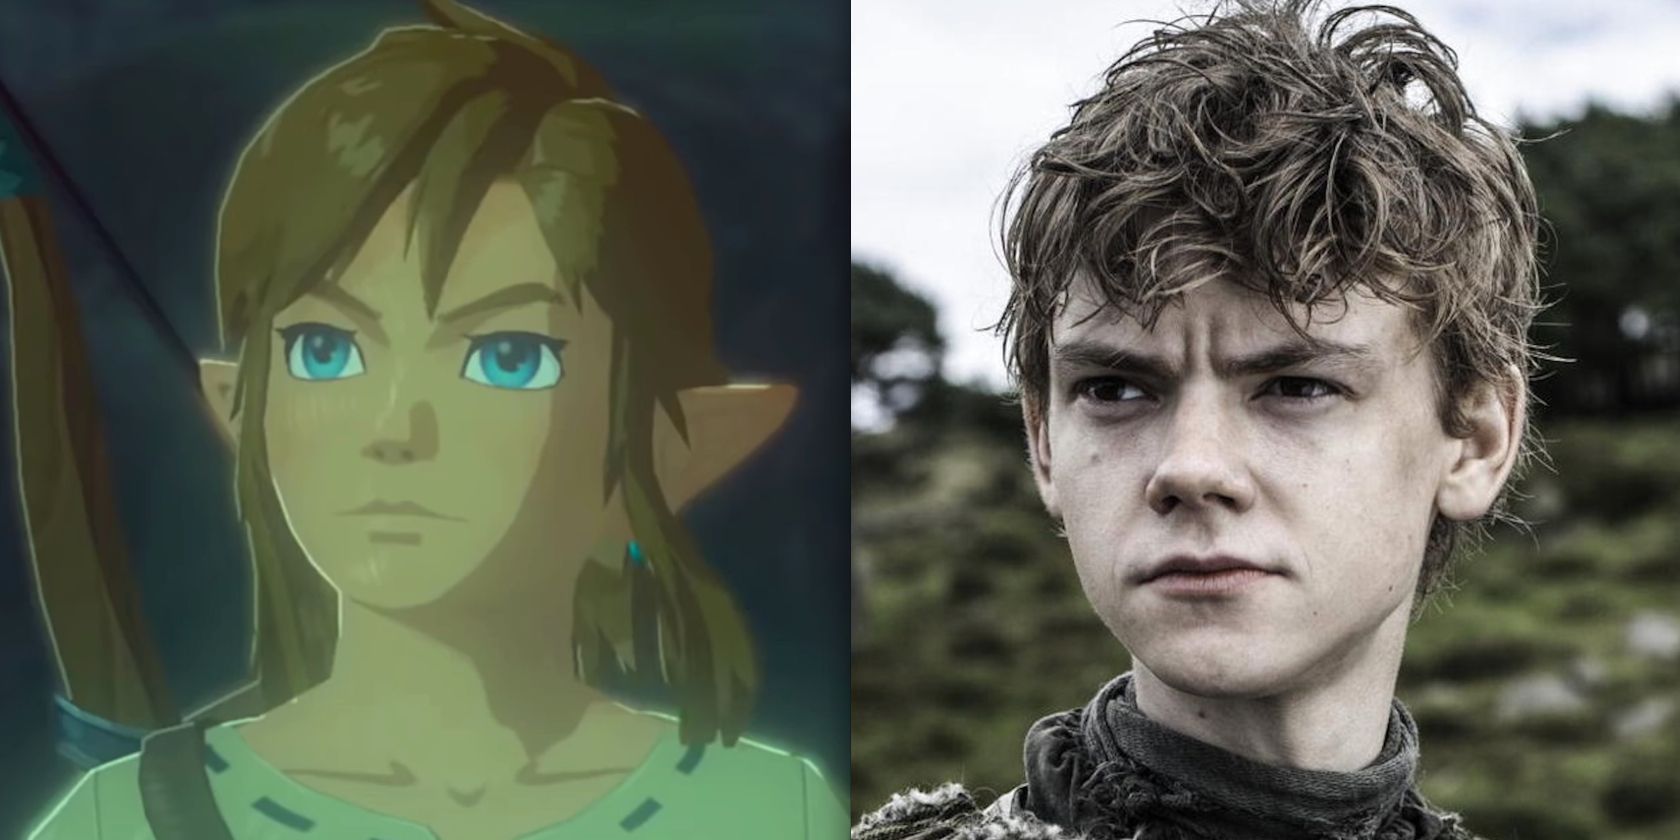 Link in The Legend of Zelda and Thomas Brodie-Stangster in Game of Thrones